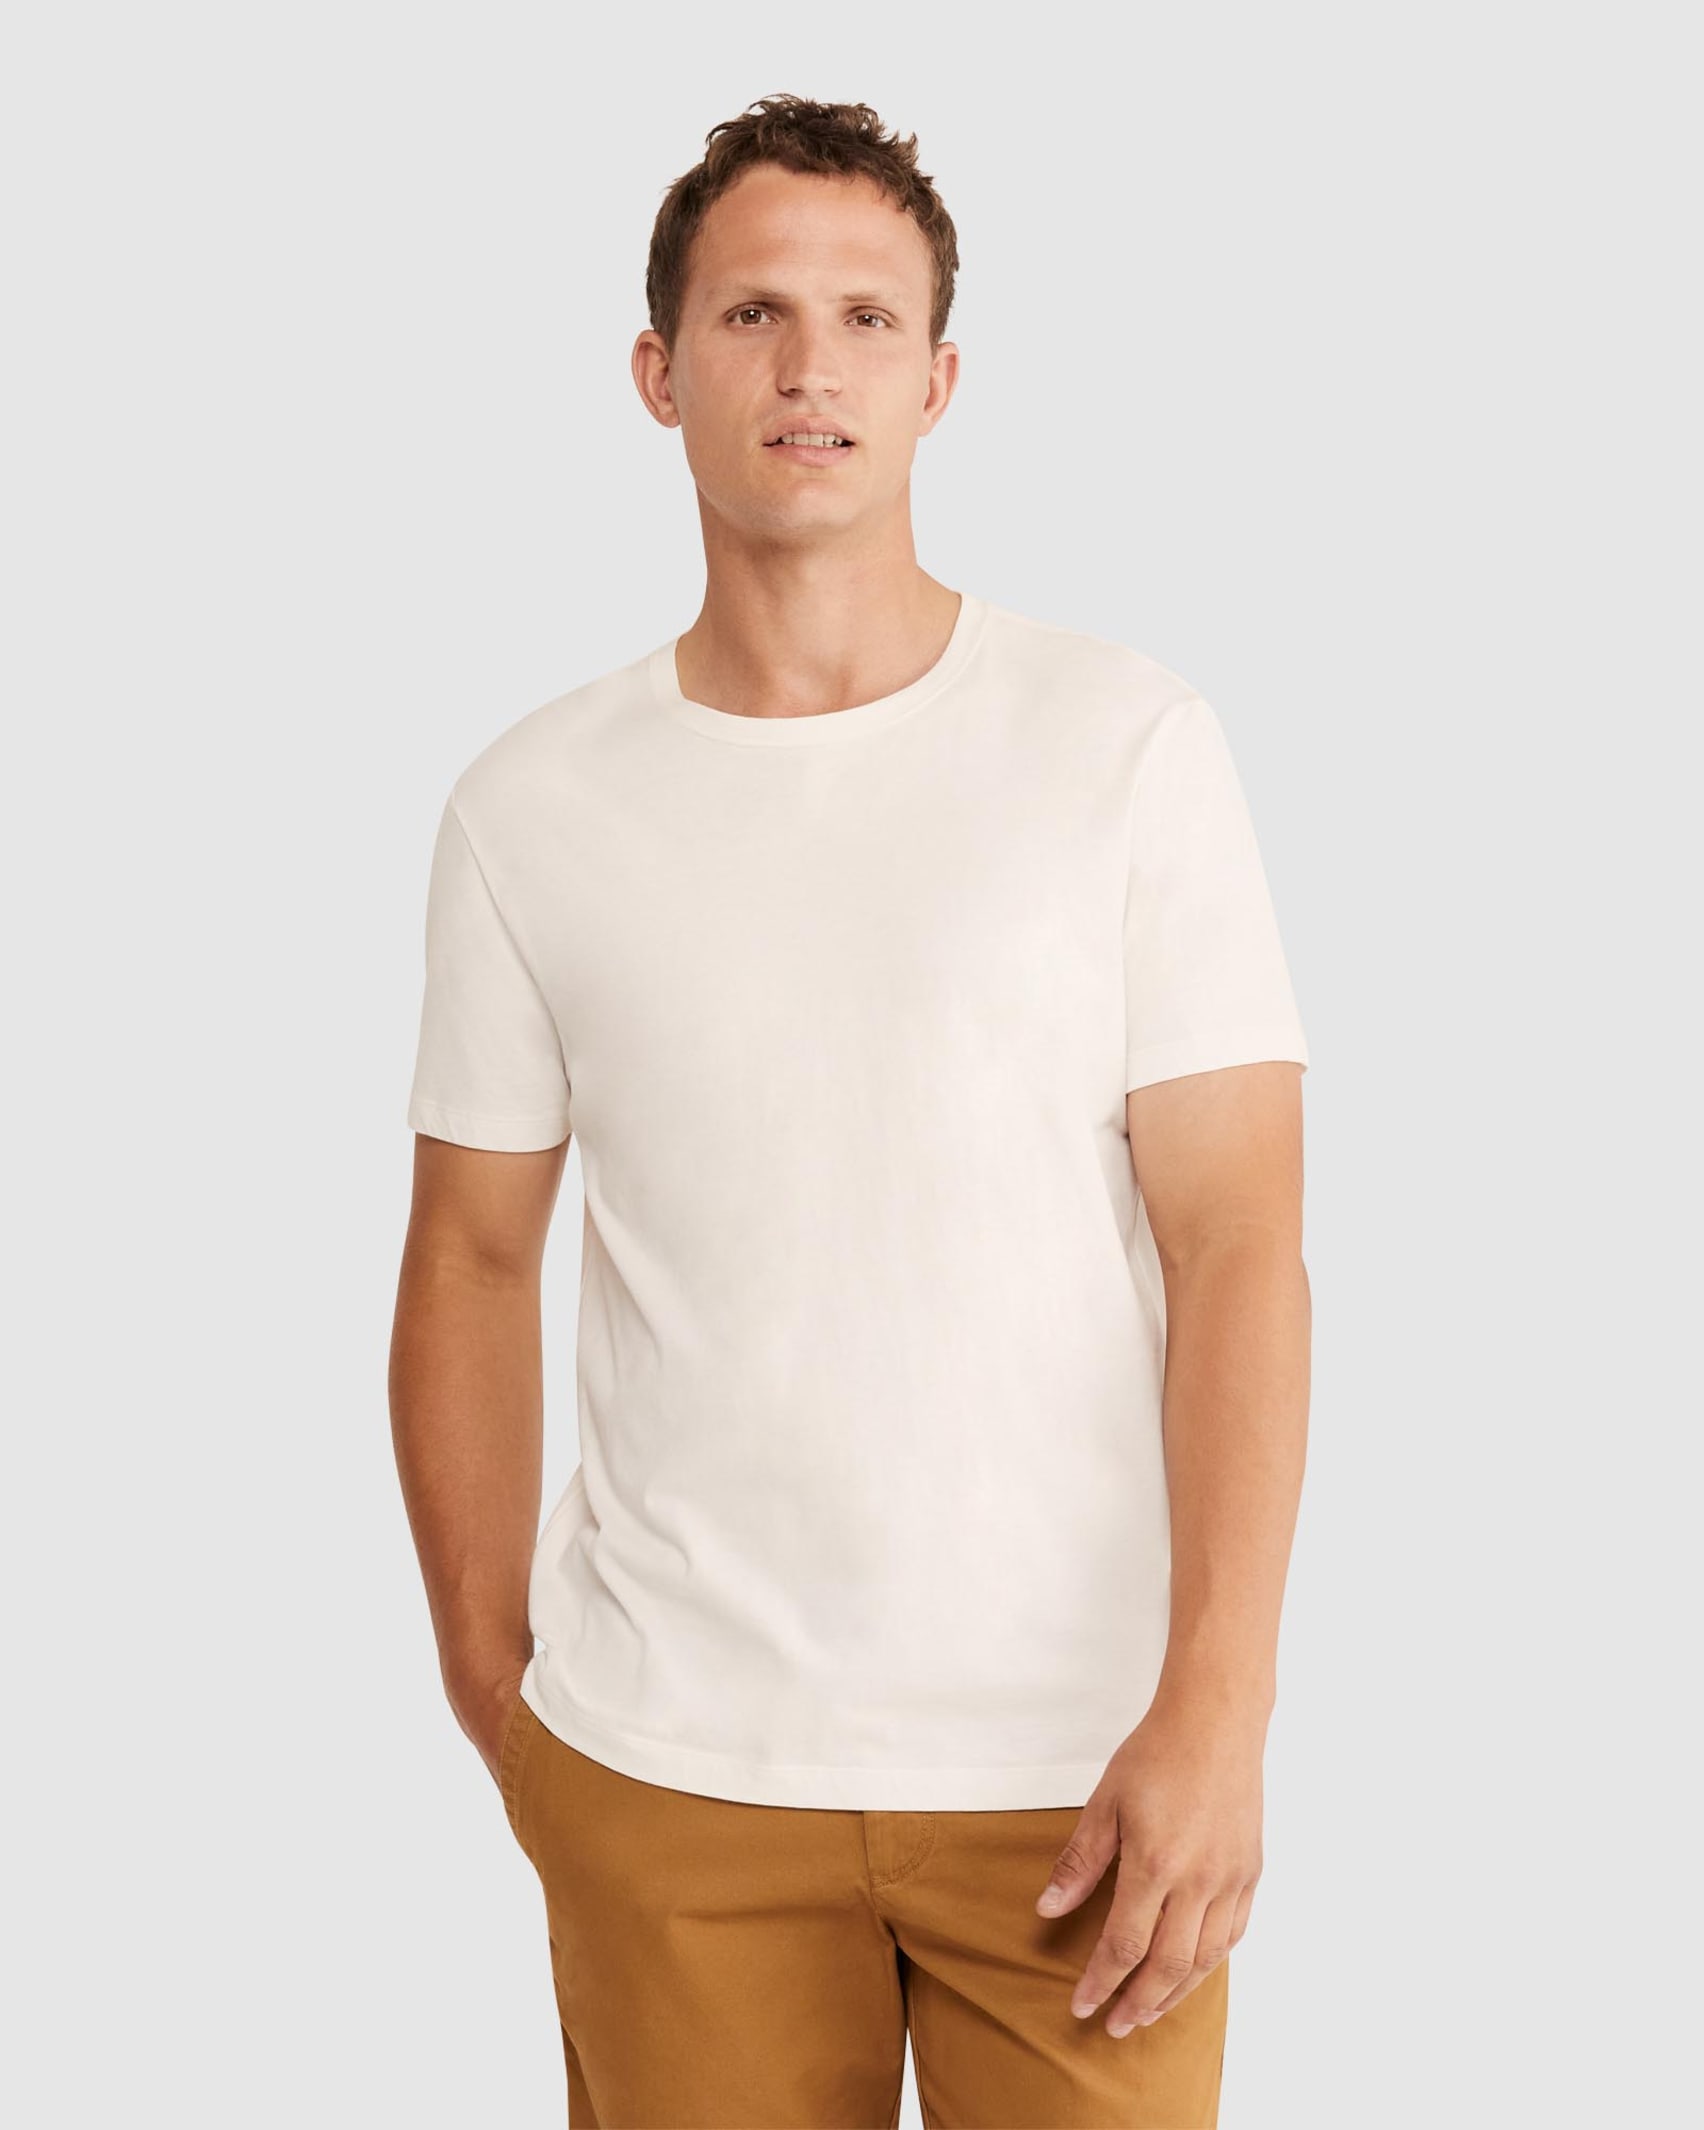 Supersoft Tee in WHITE